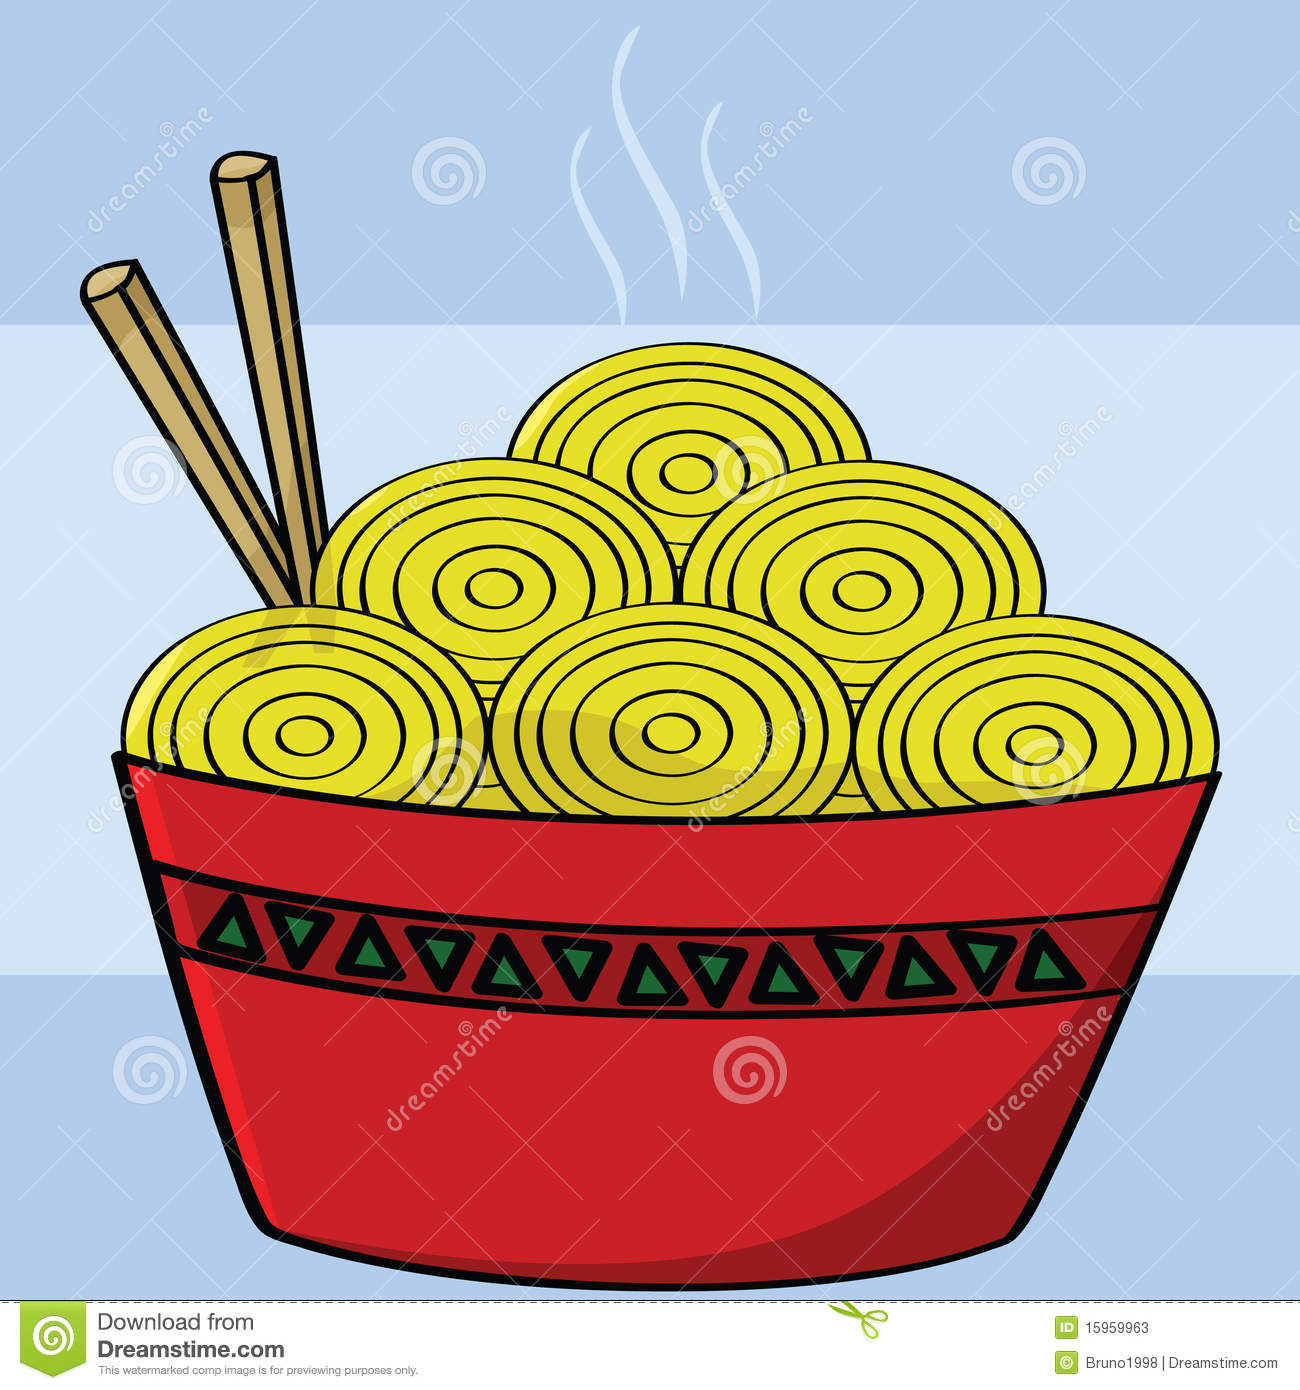 Cartoon Illustration Of A Bowl Of Noodles With Two Chopsticks